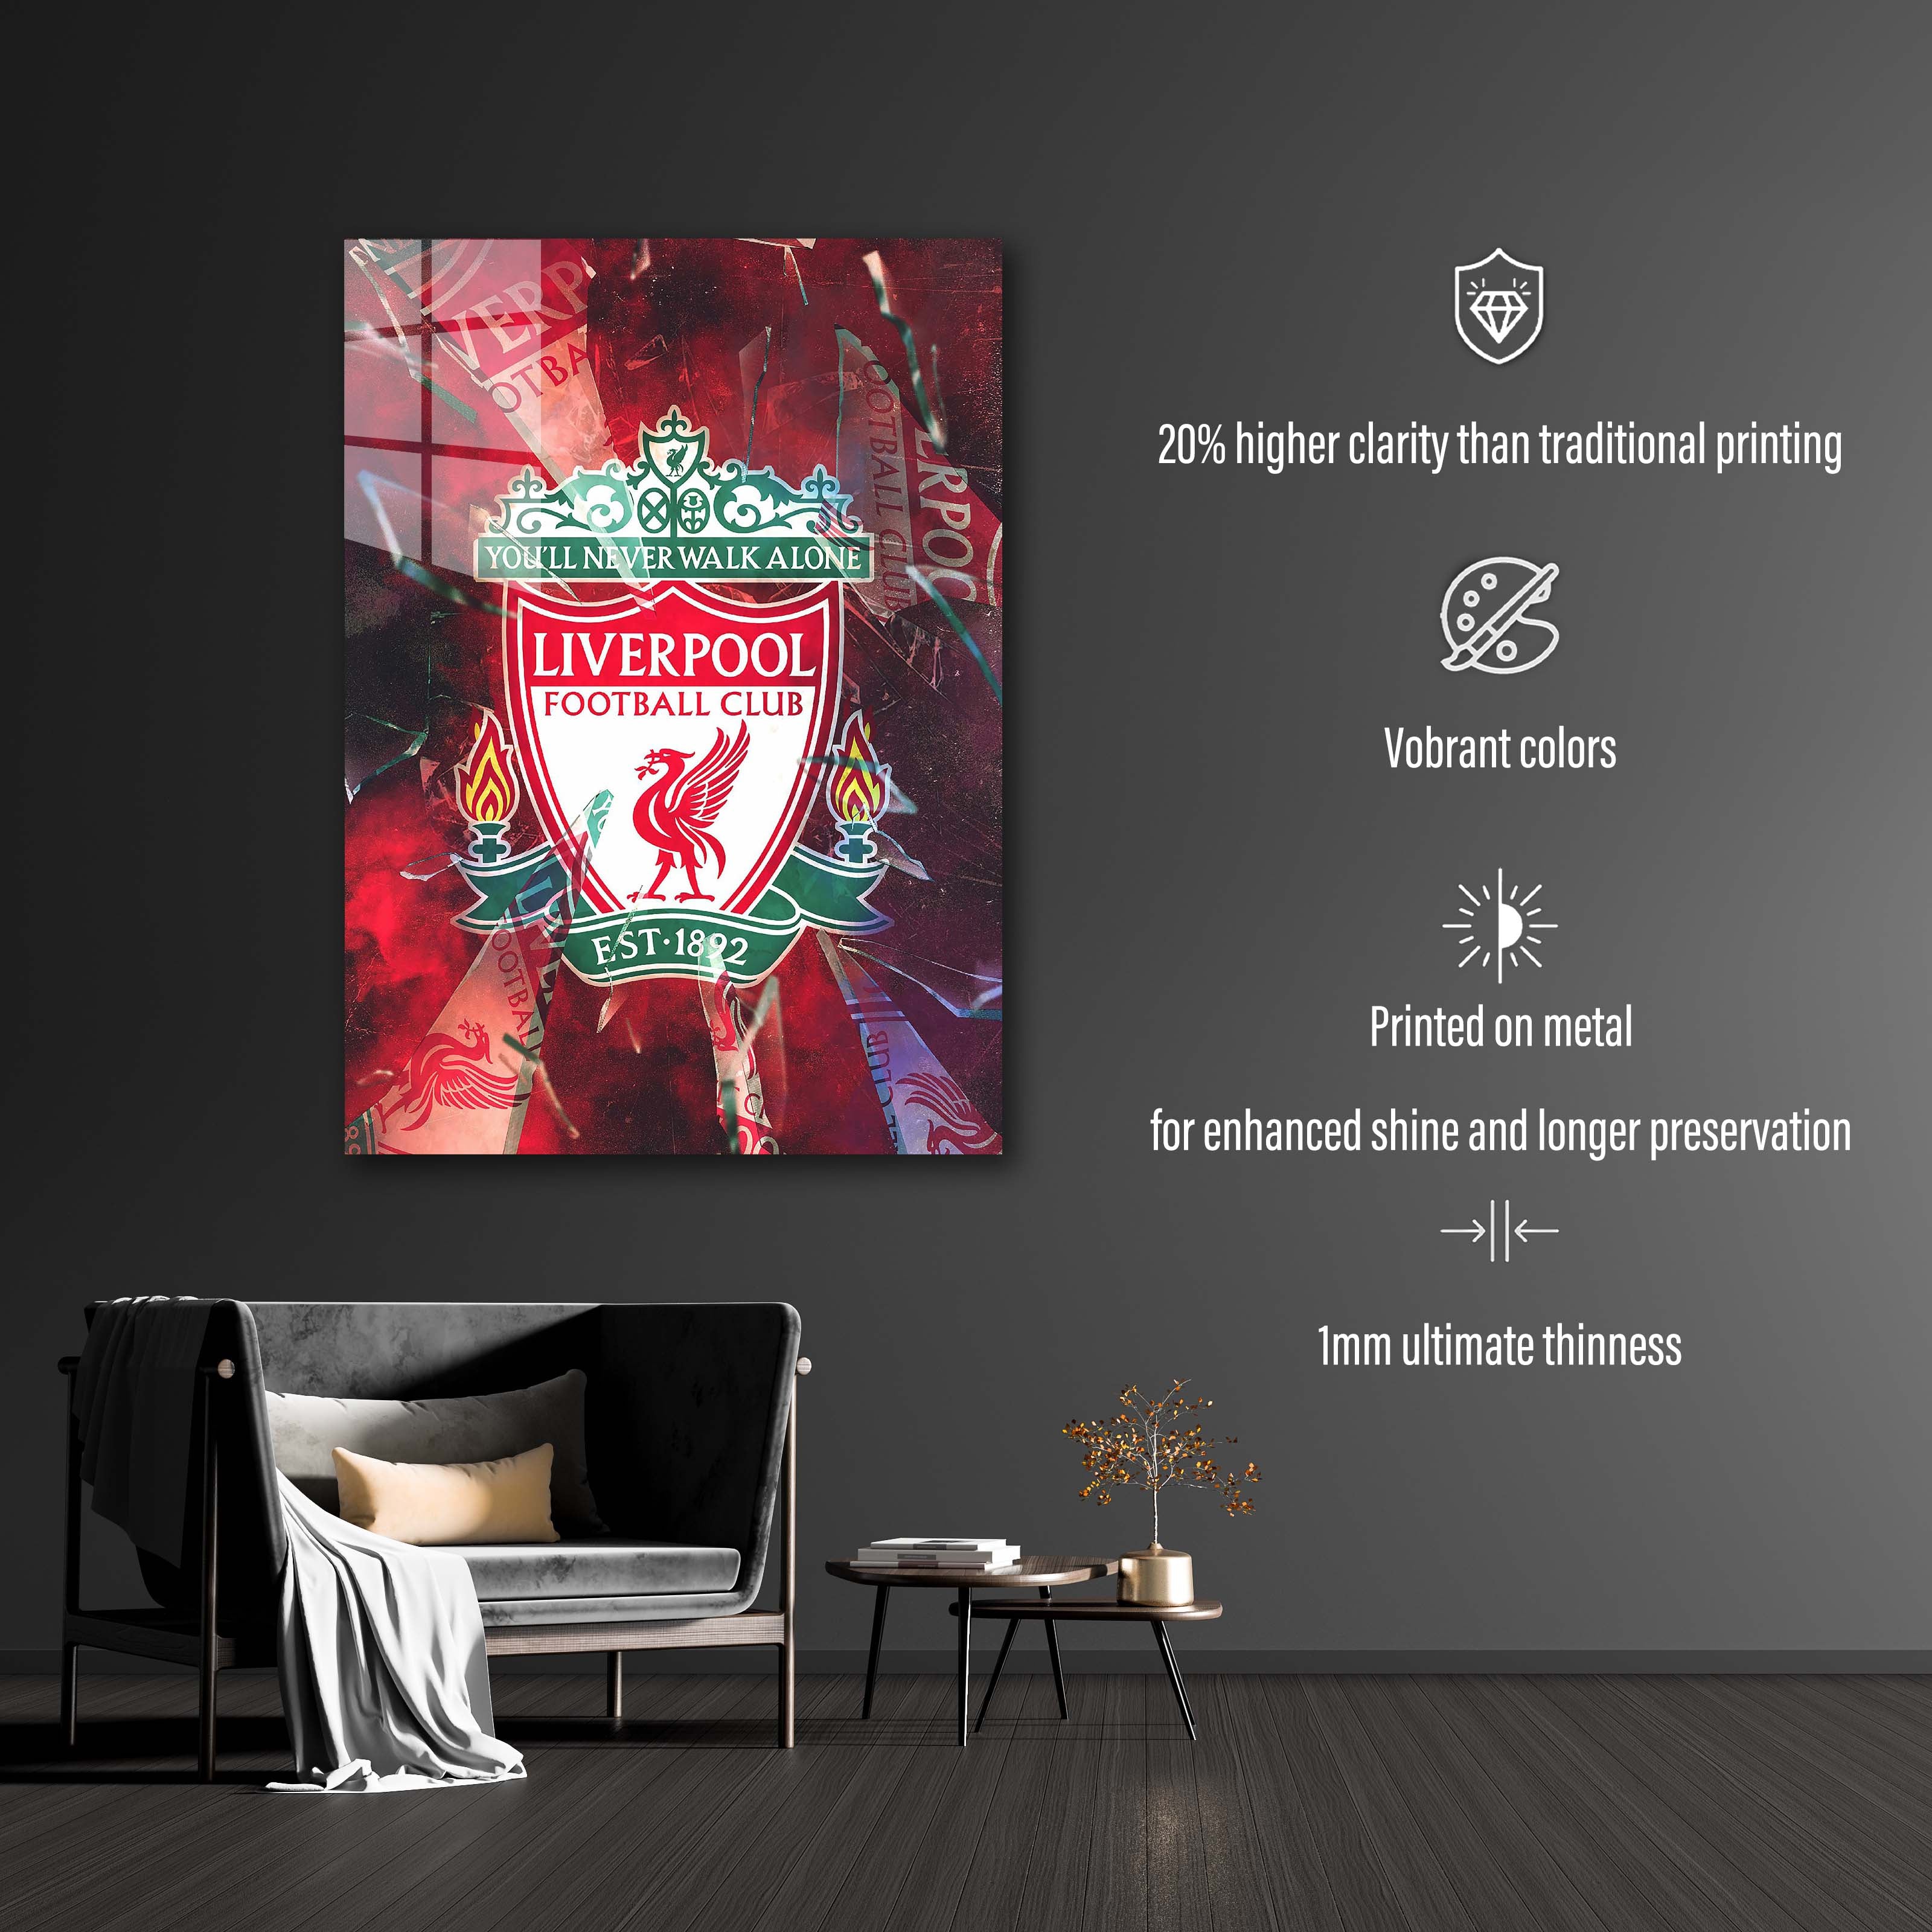 Liverpool poster-designed by @Hoang Van Thuan